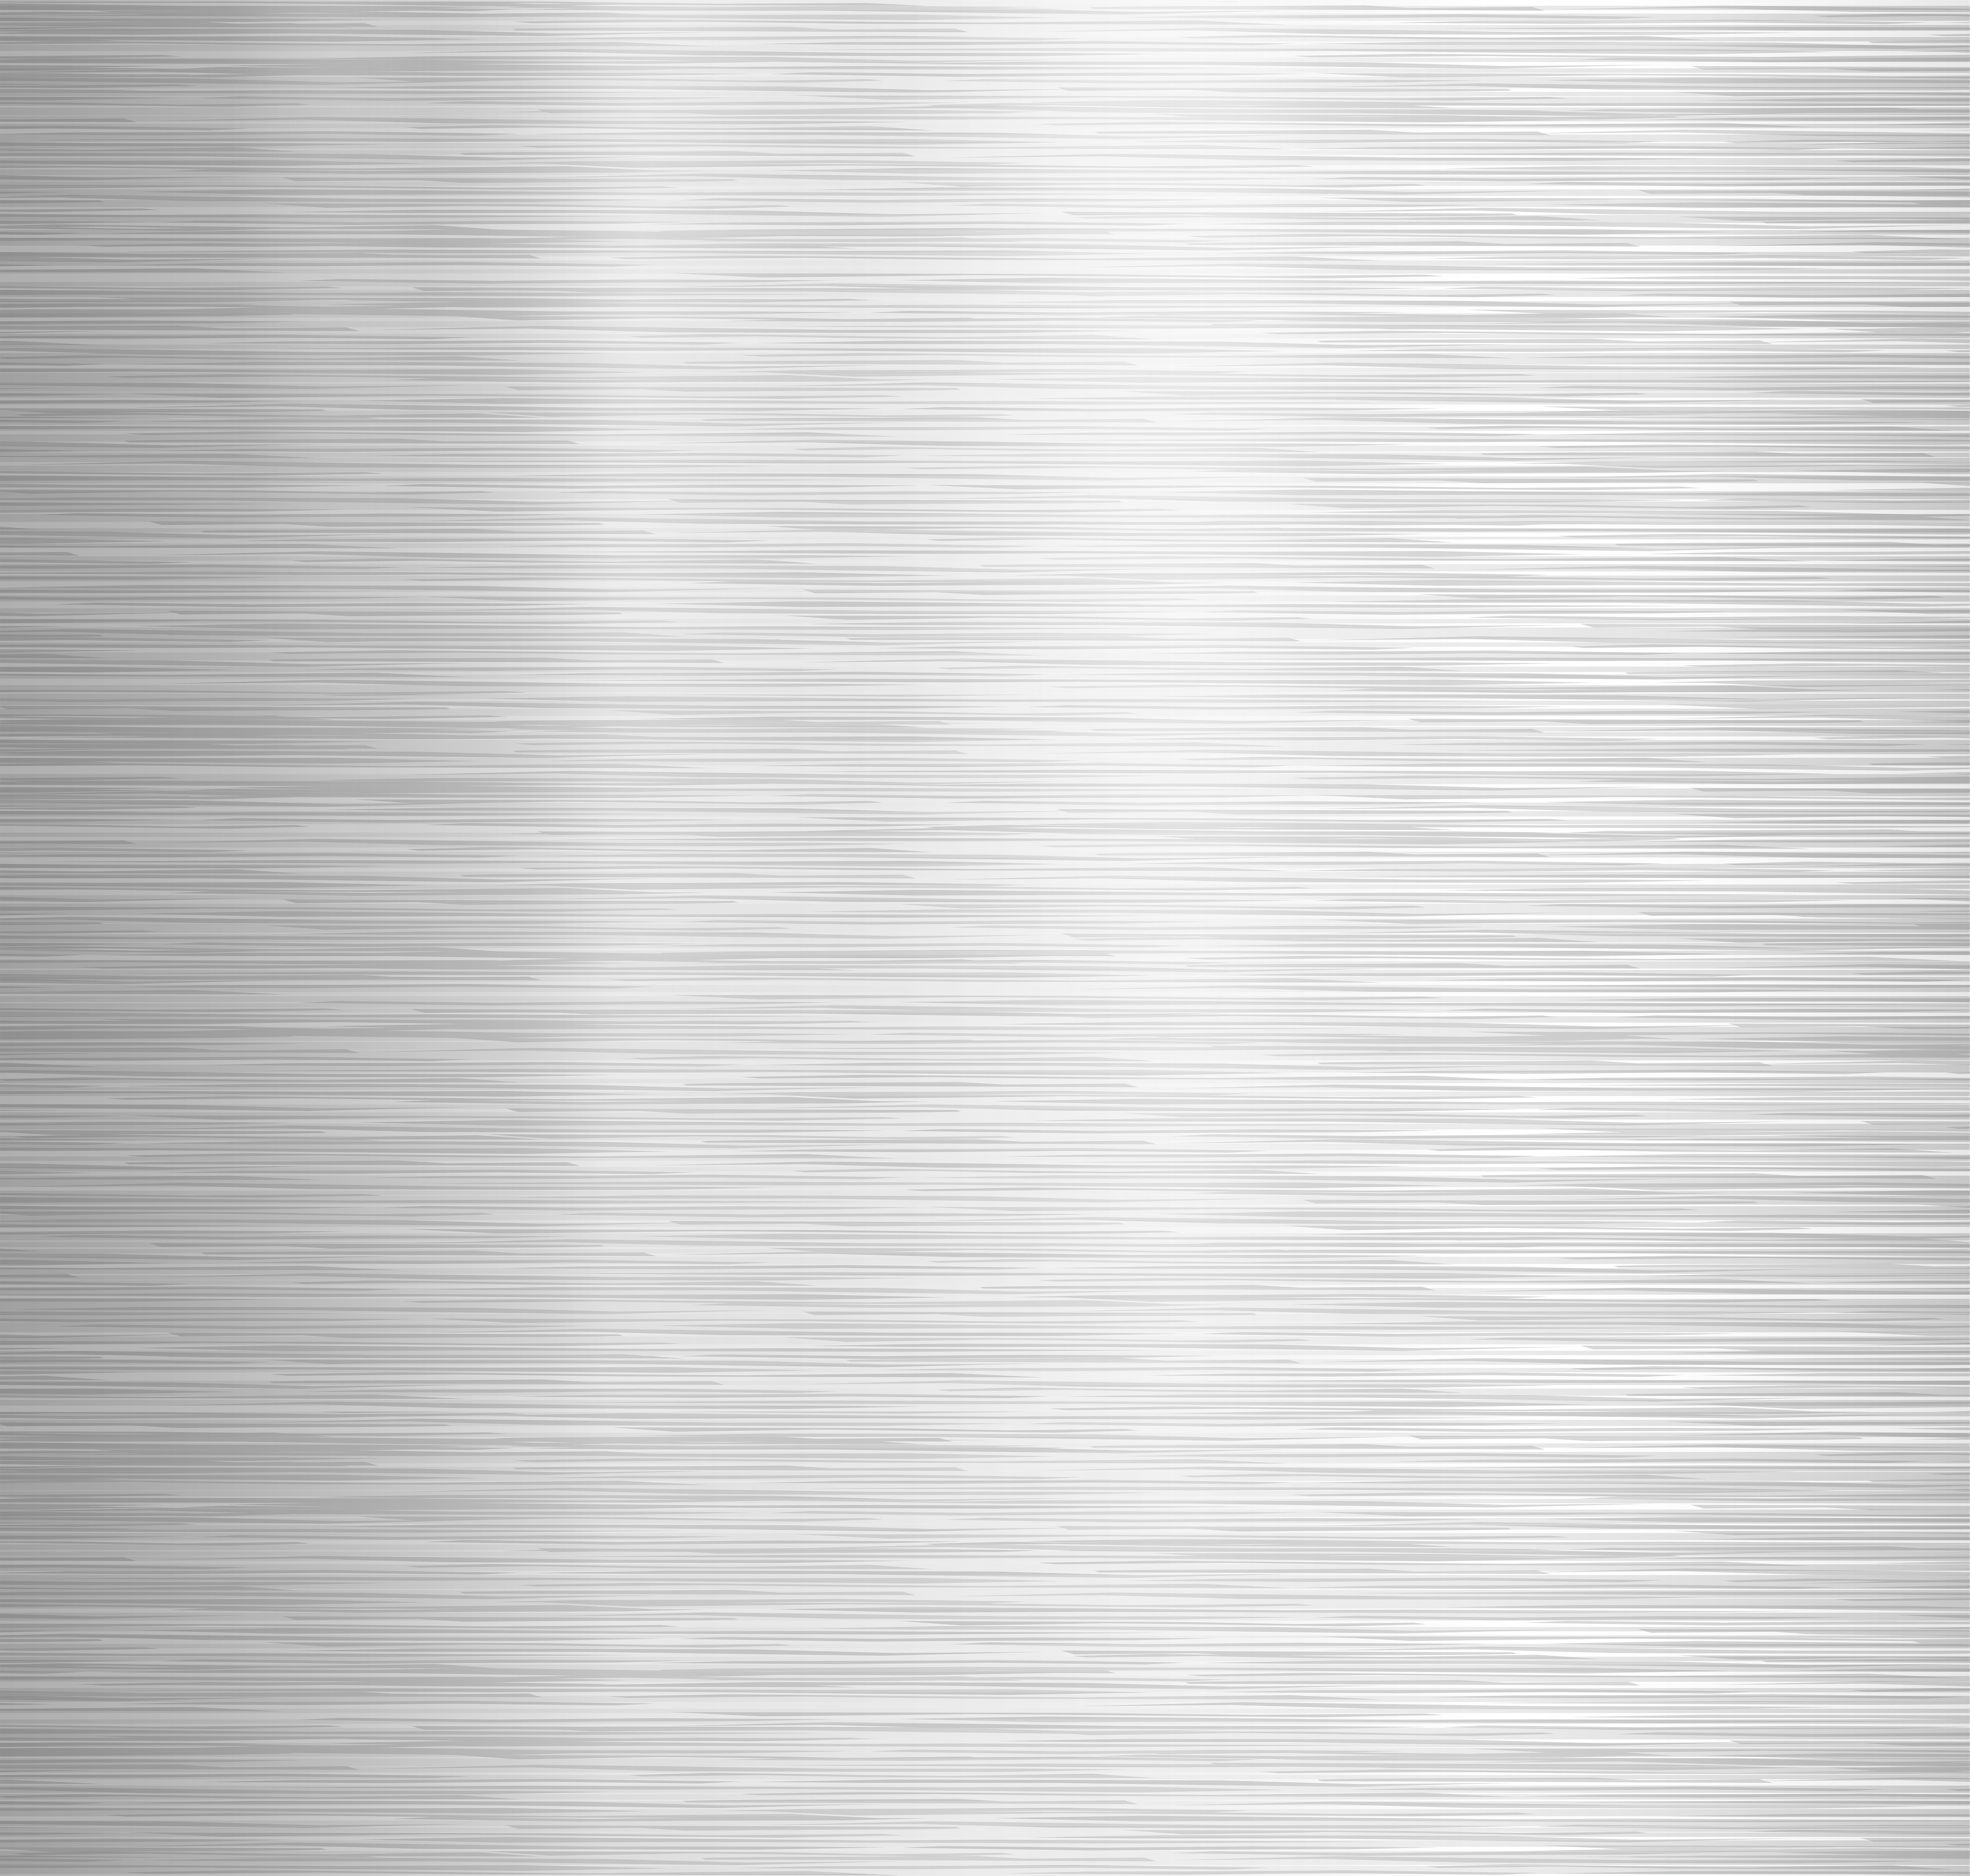 Silver Background Gallery Yopriceville High Quality Image